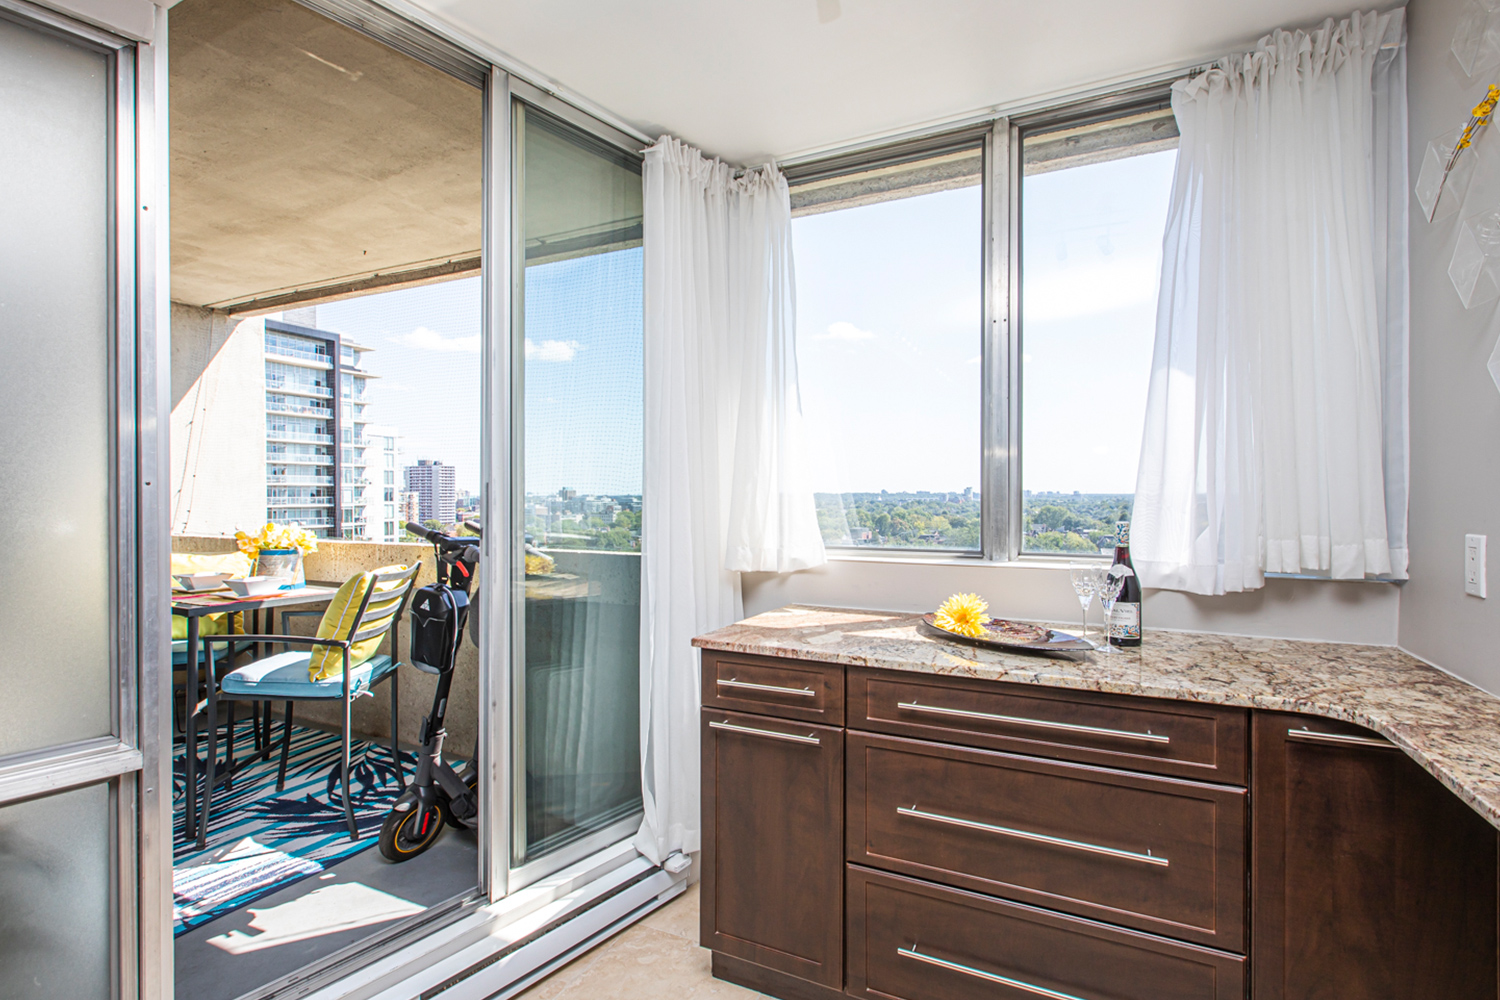 Listing__1530-530-Laurier-Ave-W__08